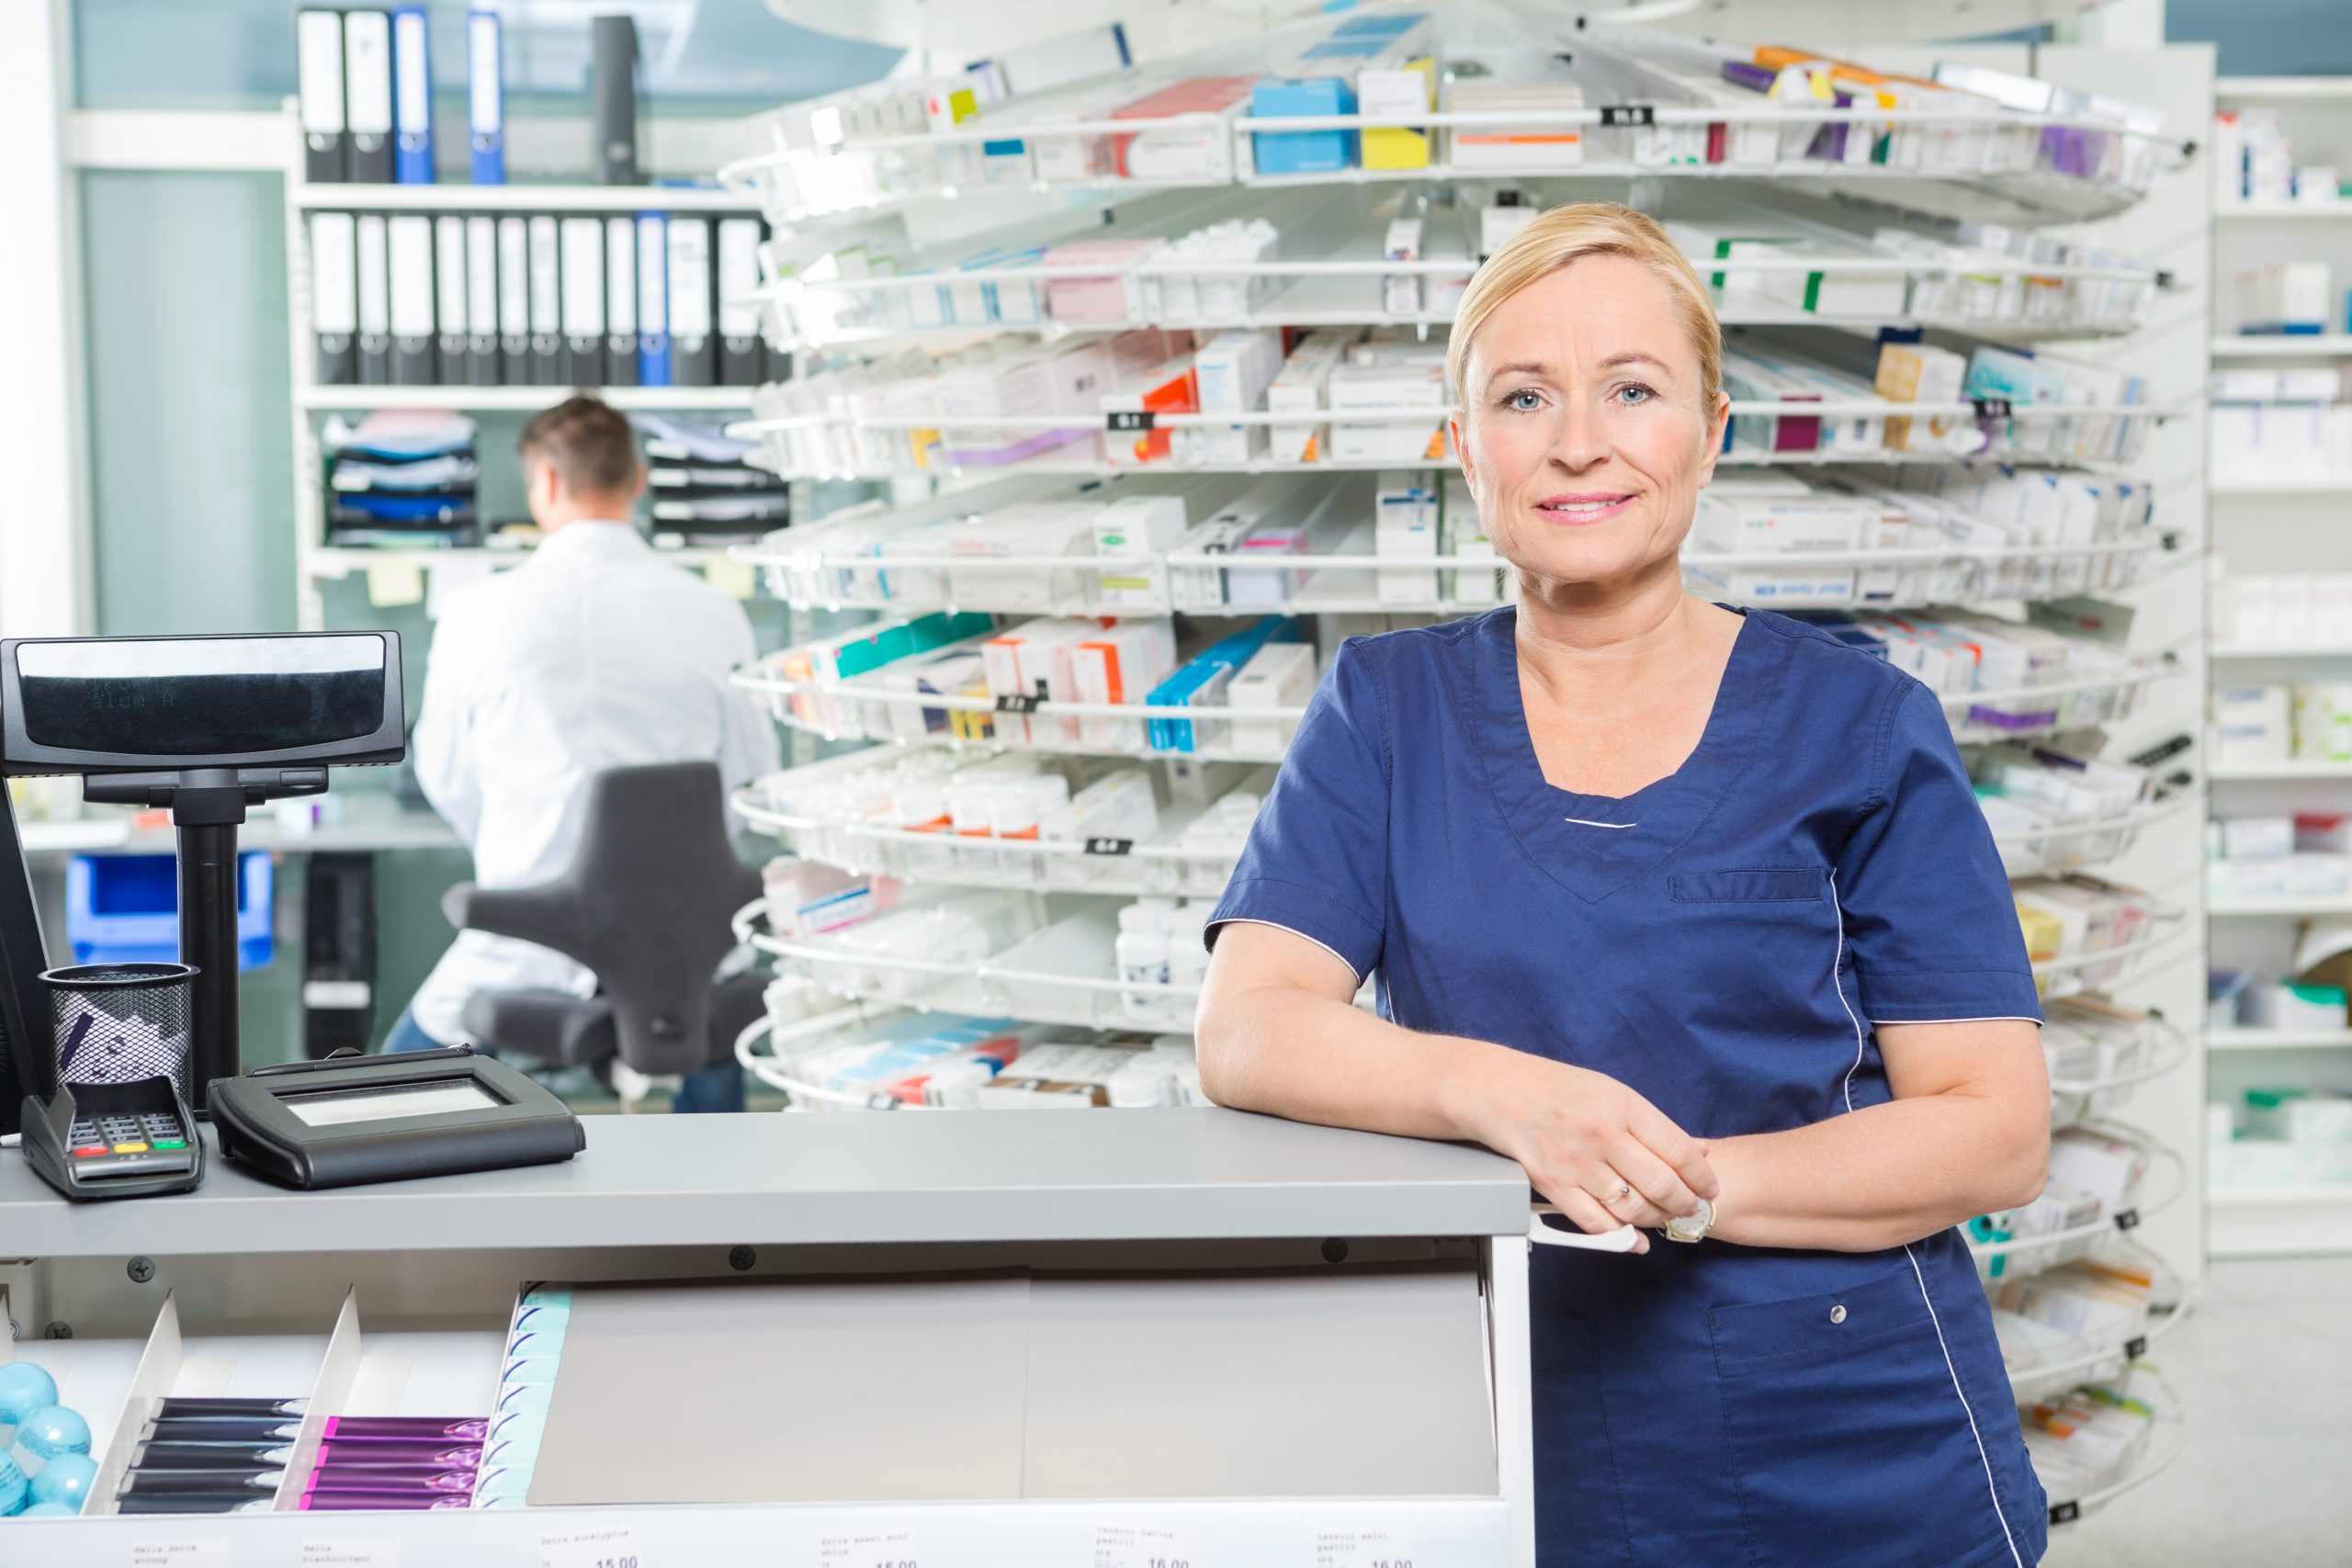 Find out more about working in the pharmacy sector